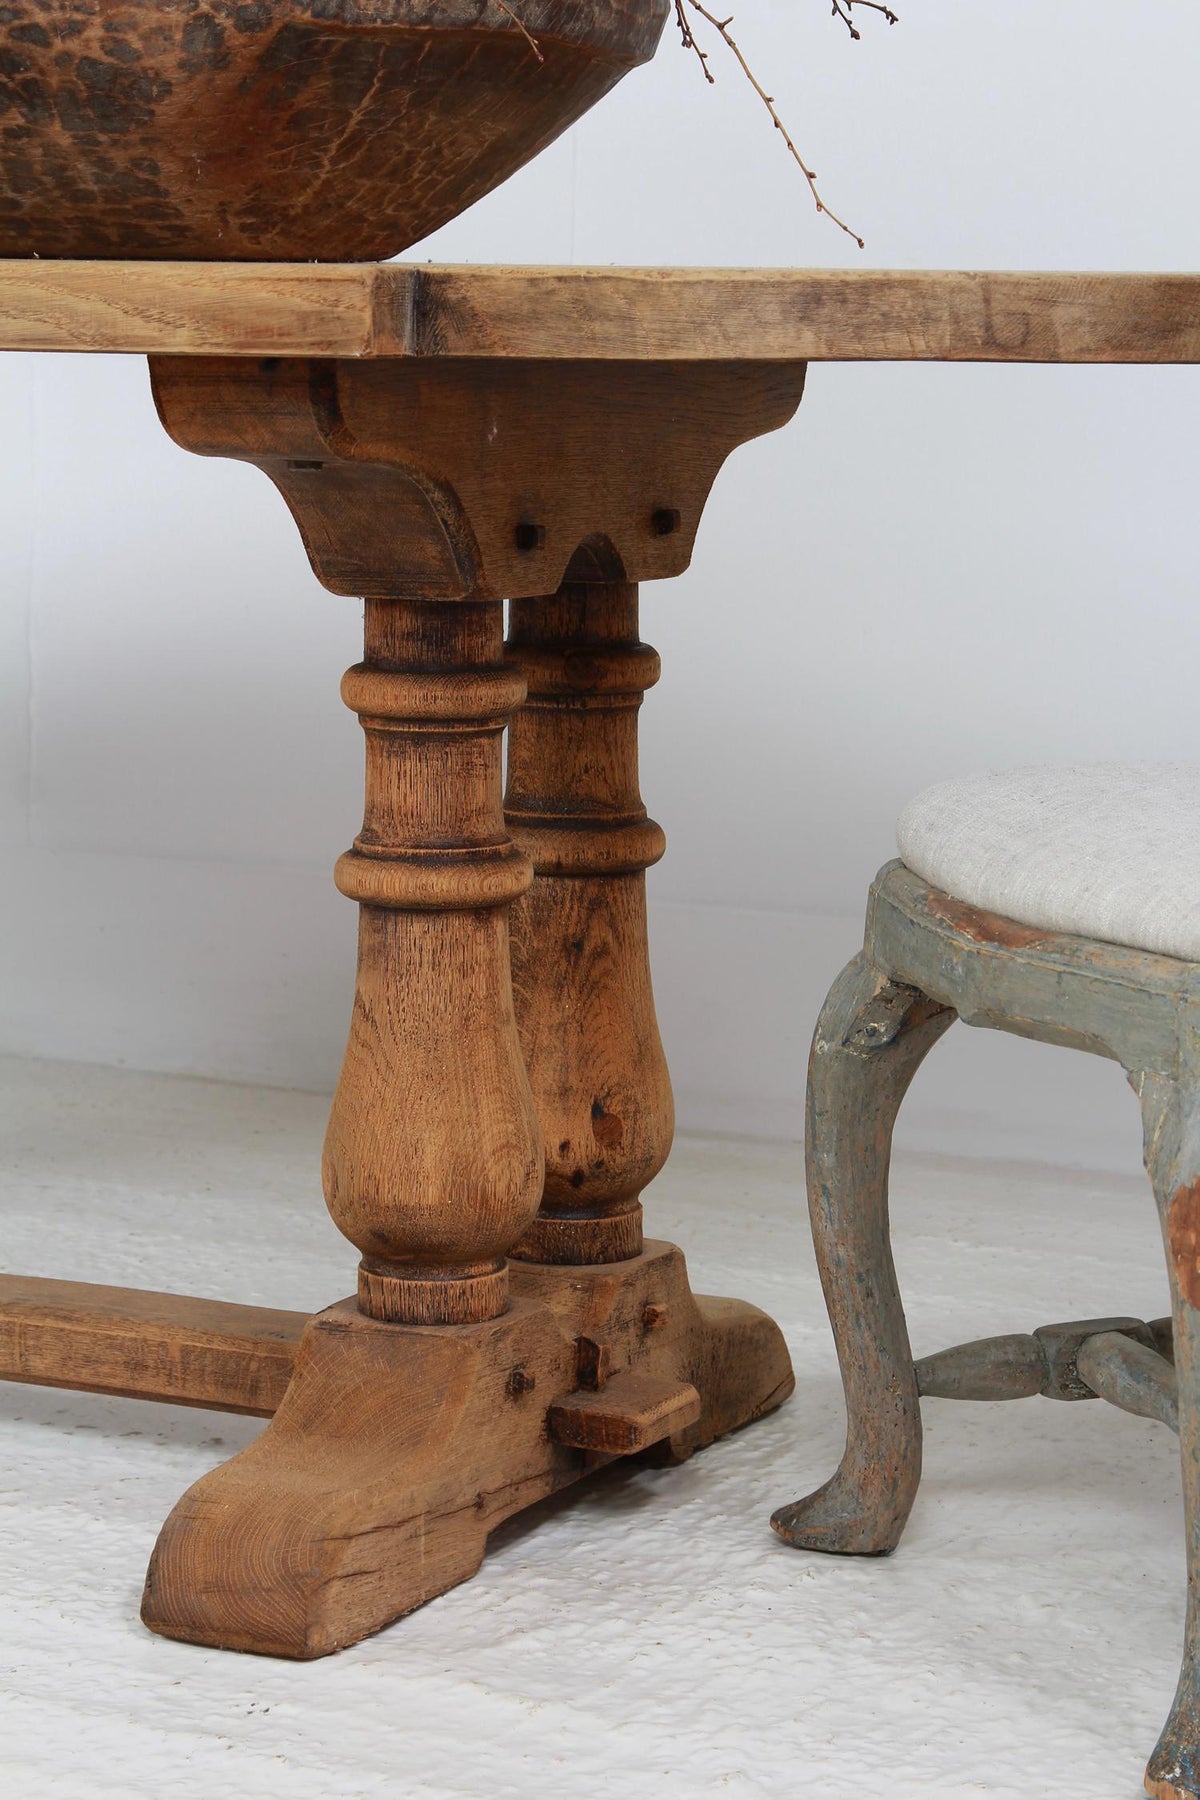 Architectural BELGIAN BLEACHED OAK DINING/CONSOLE TABLE